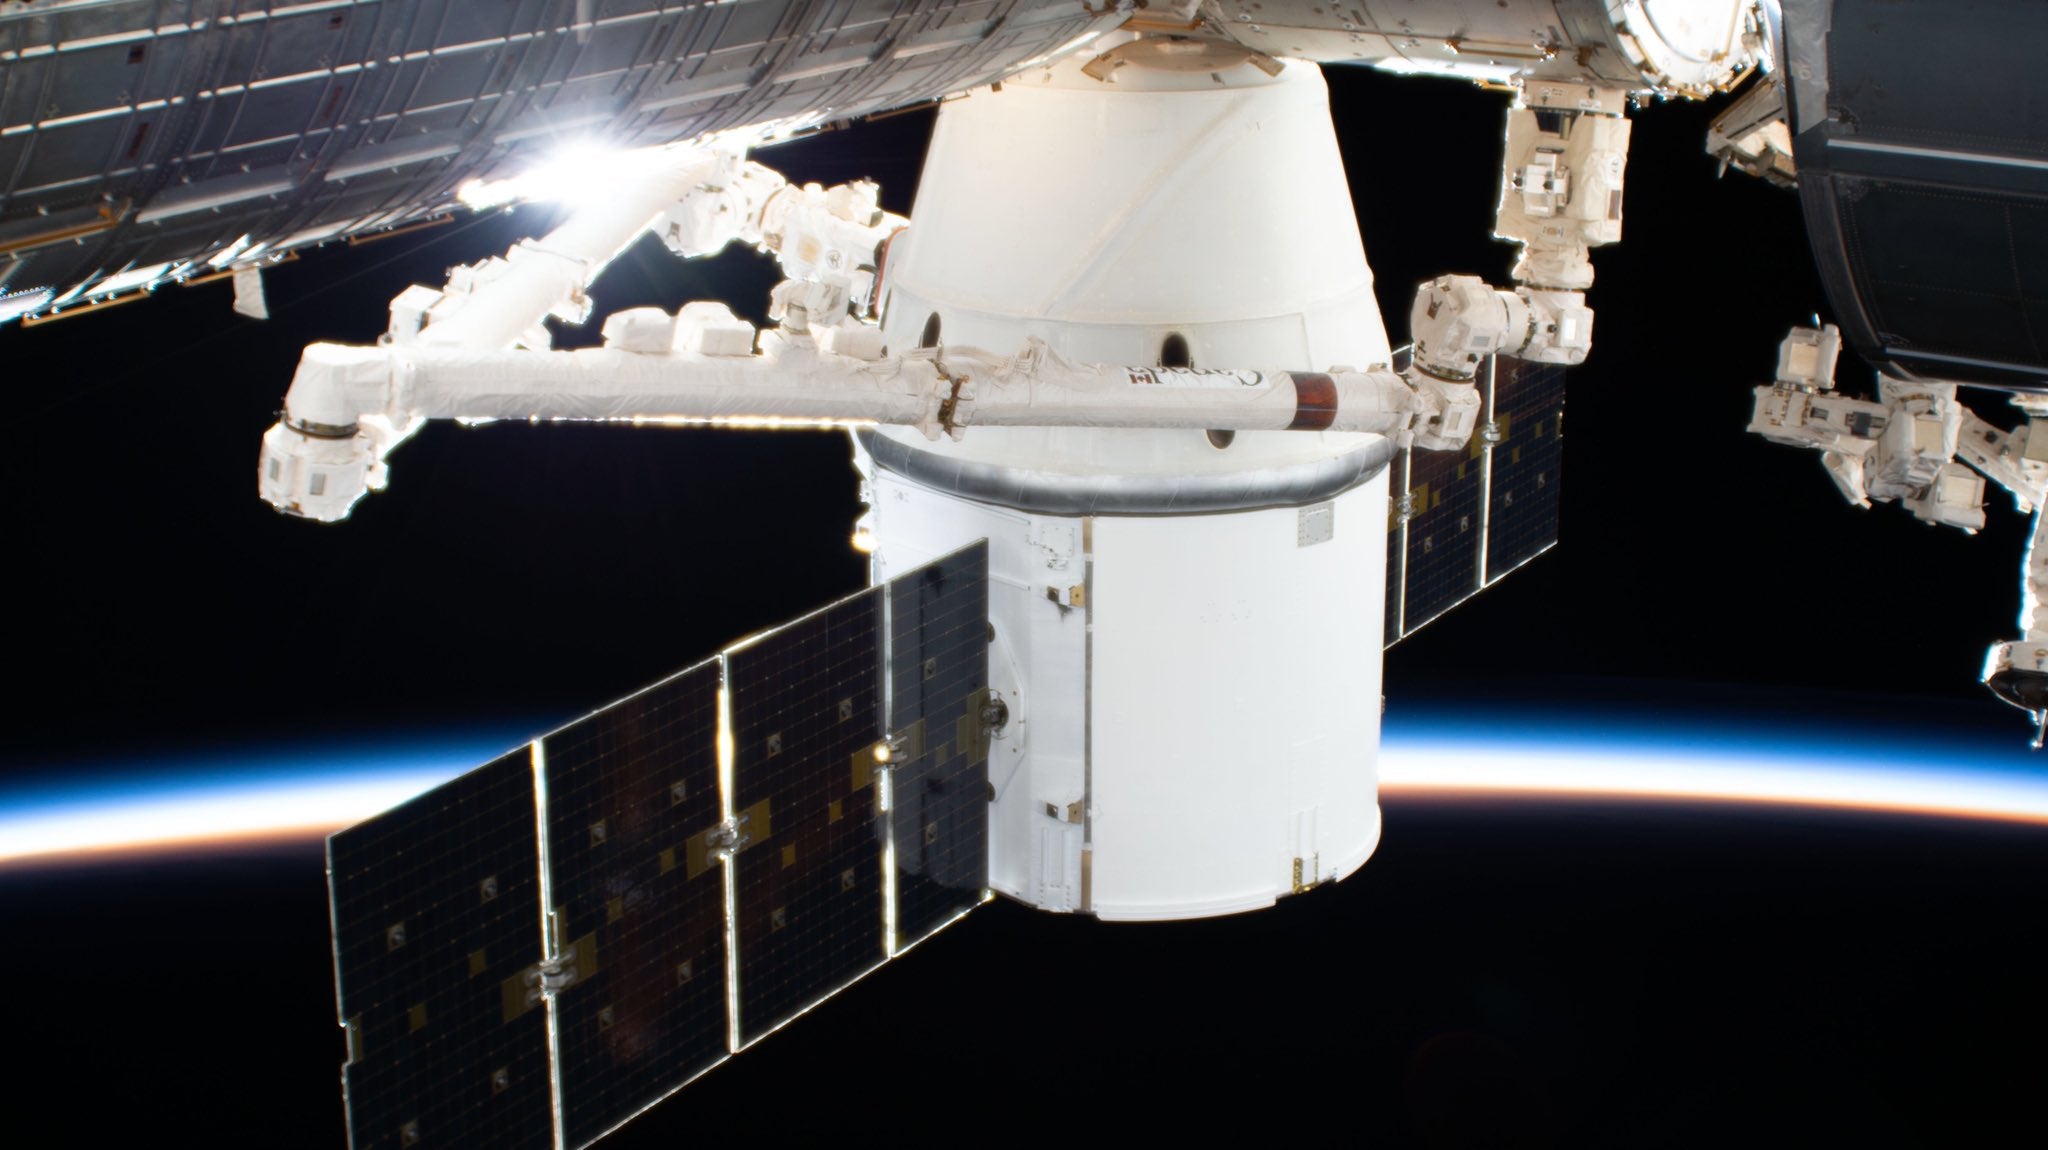 SpaceX's Dragon spacecraft will depart the Space Station tomorrow morning. Watch It Live!